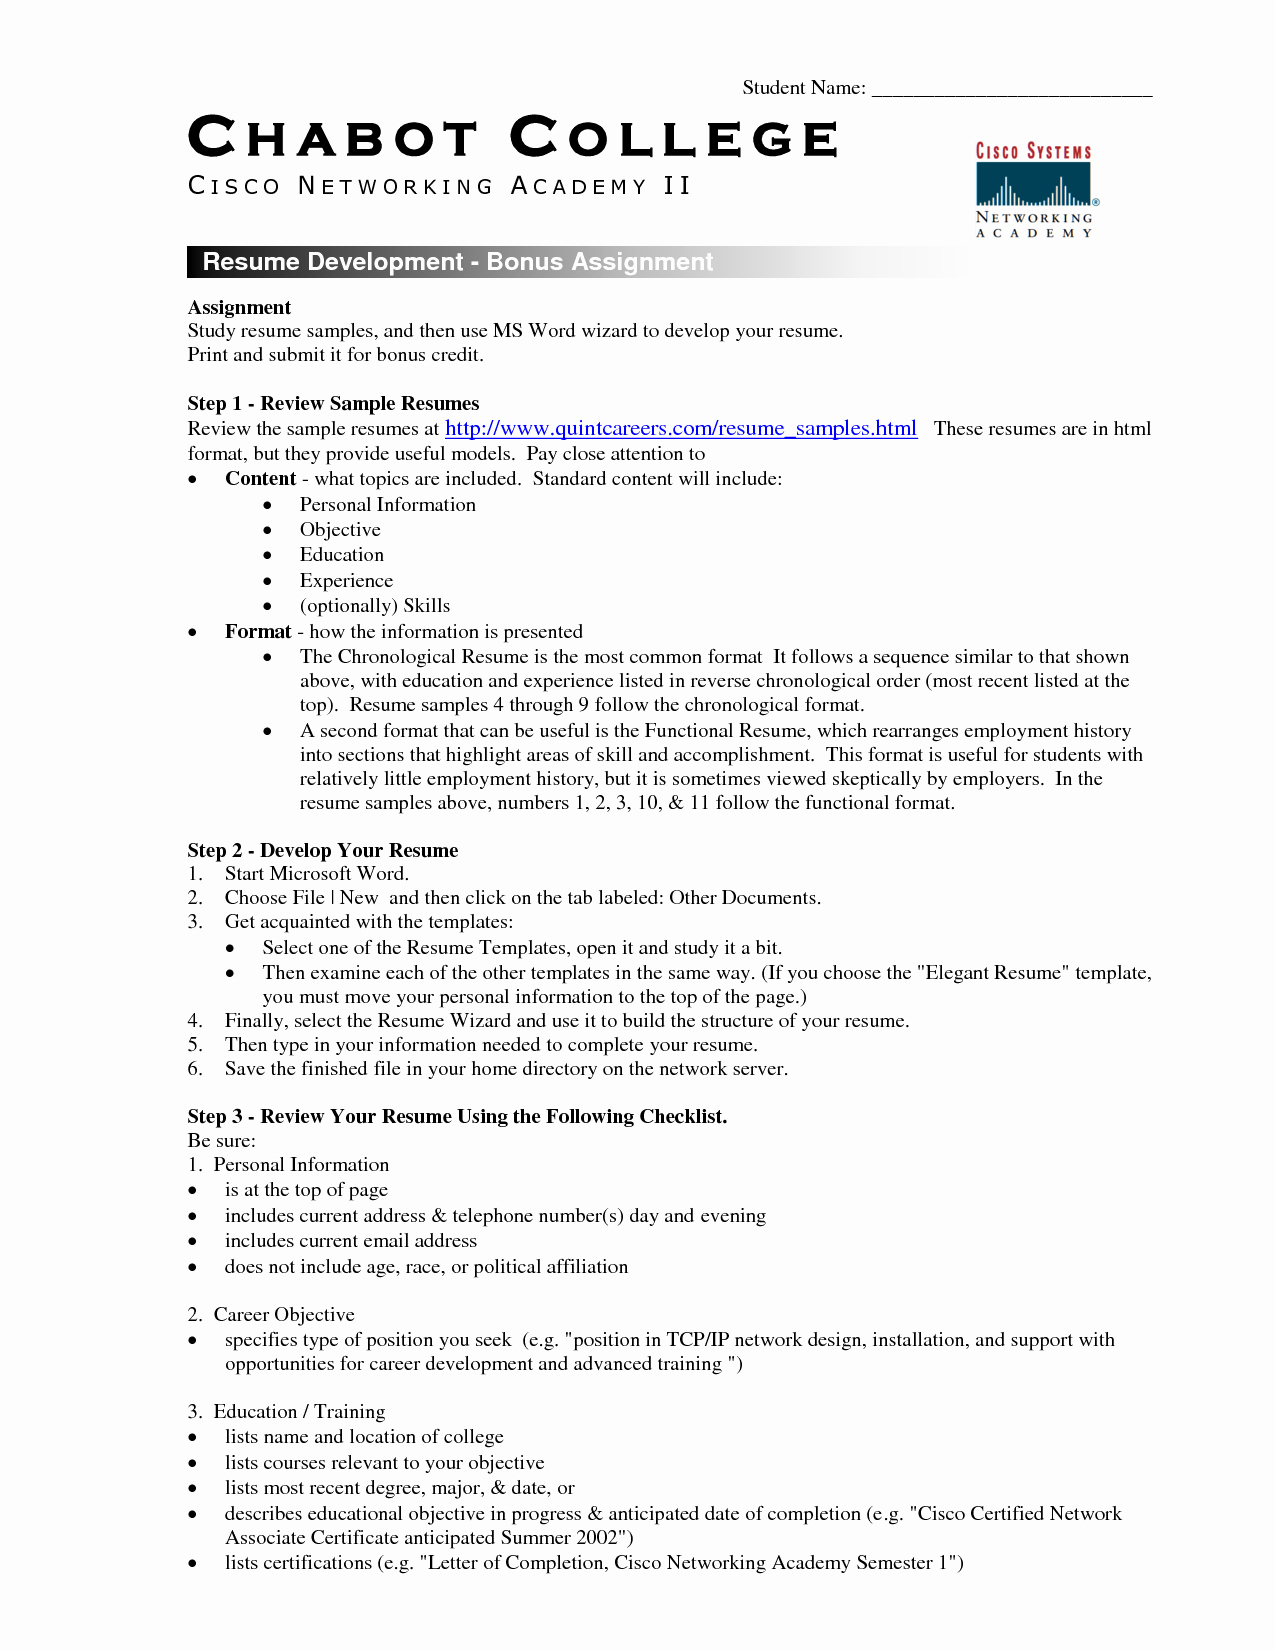 College Student Resume Template Microsoft Word Within College Student Resume Template Microsoft Word